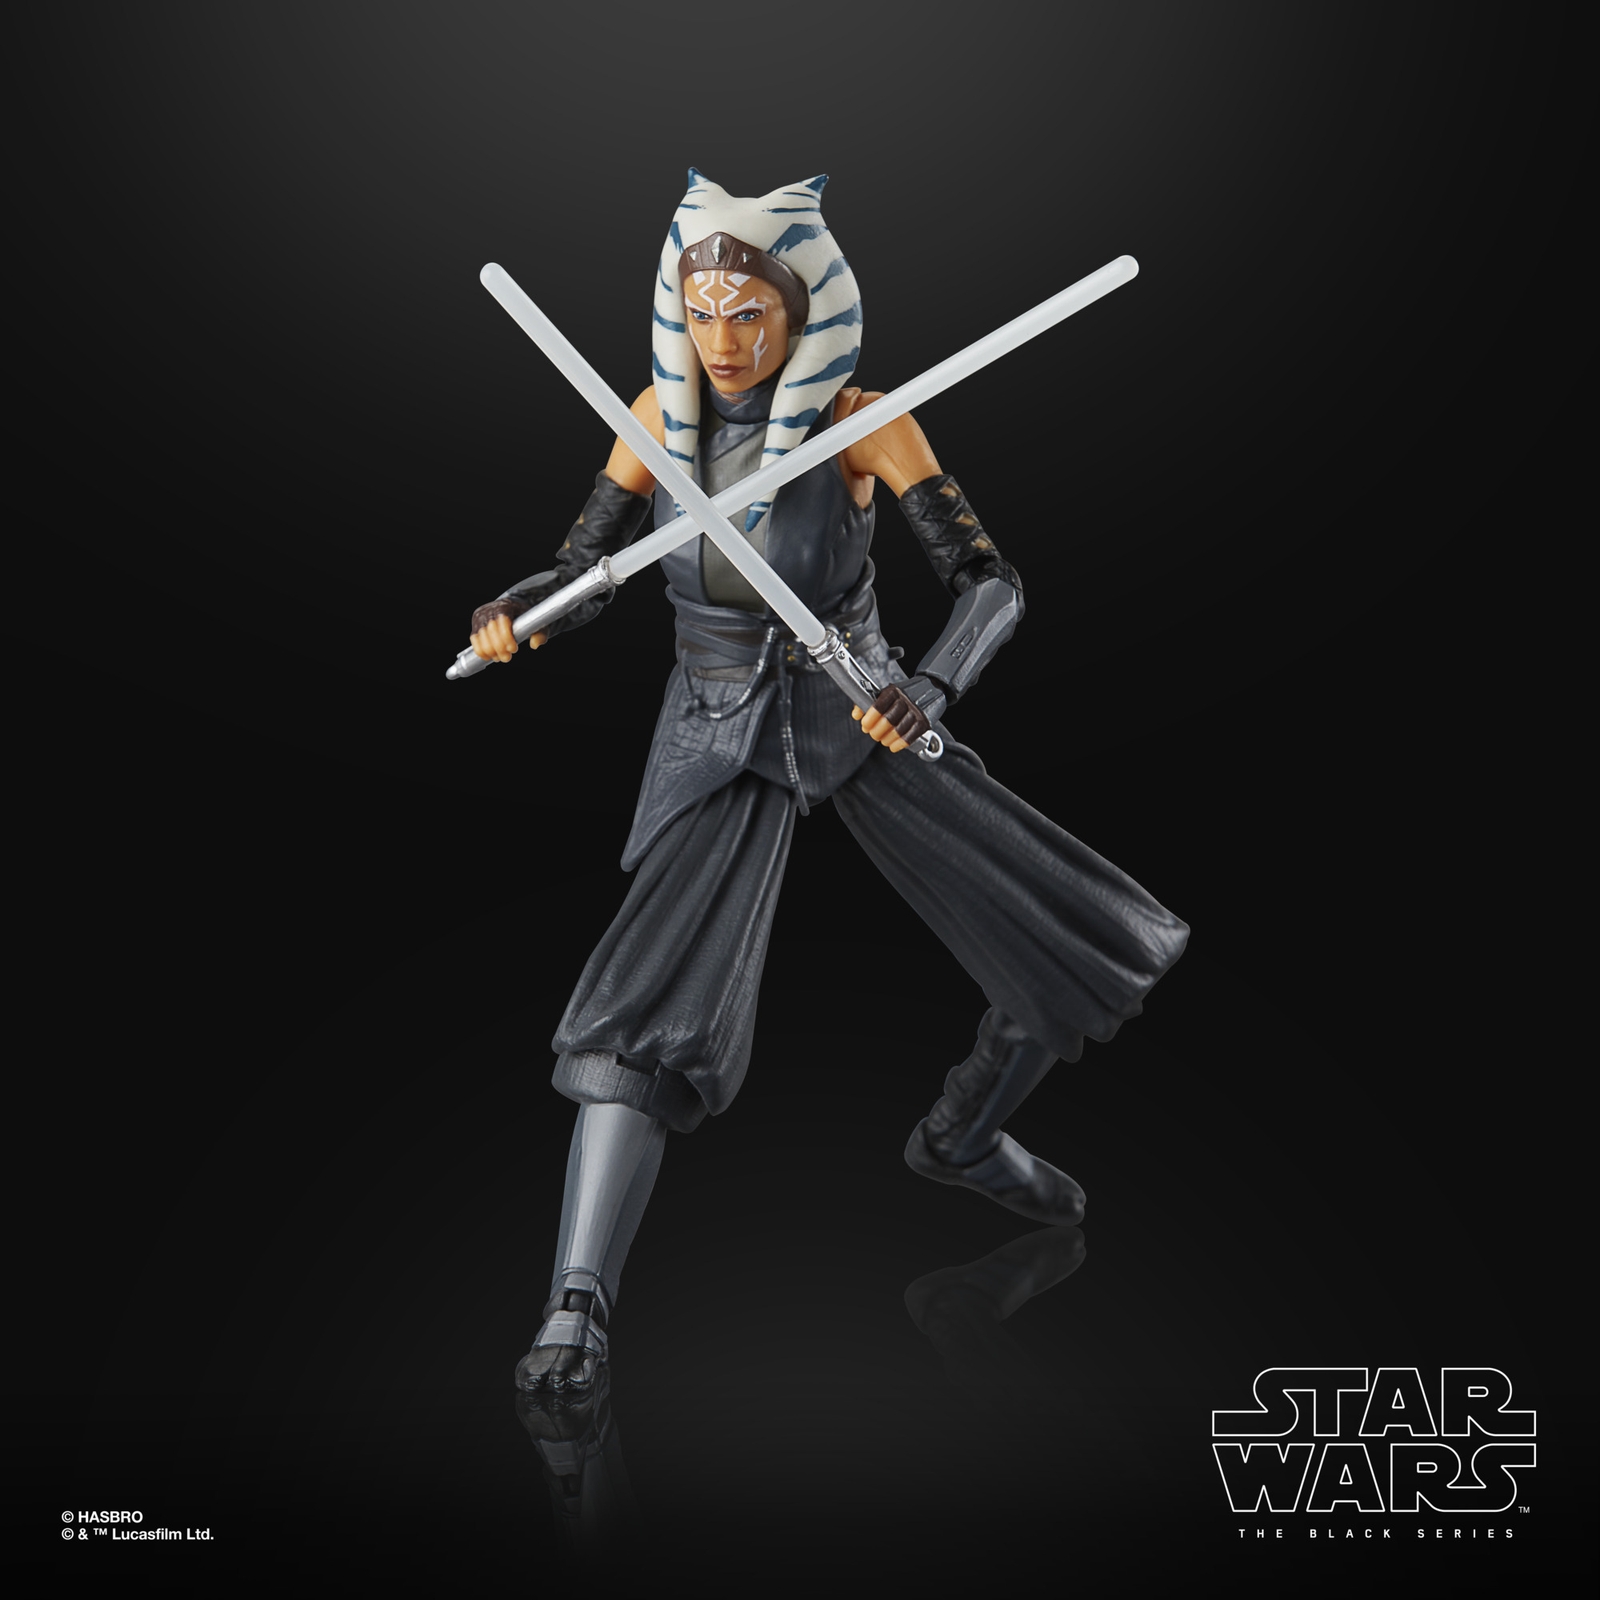 Hasbro Star Wars The Black Series Archive Collection Ahsoka Tano, Star Wars Collectible 6 Inch Action Figure